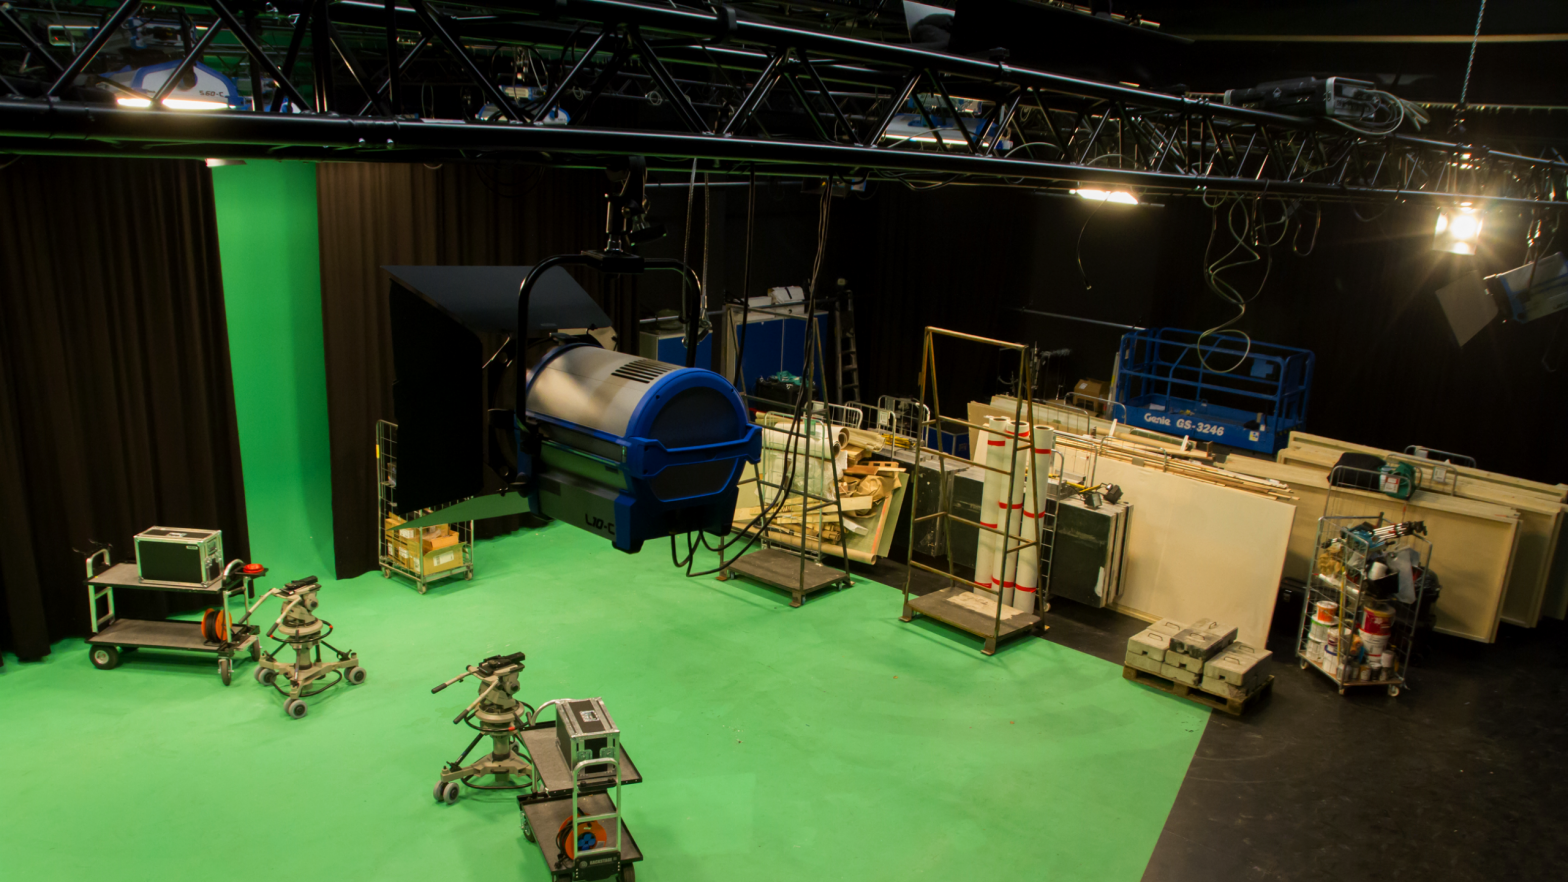 New Arri film production lights in Roihupelto Studios and on Aalto Takeout